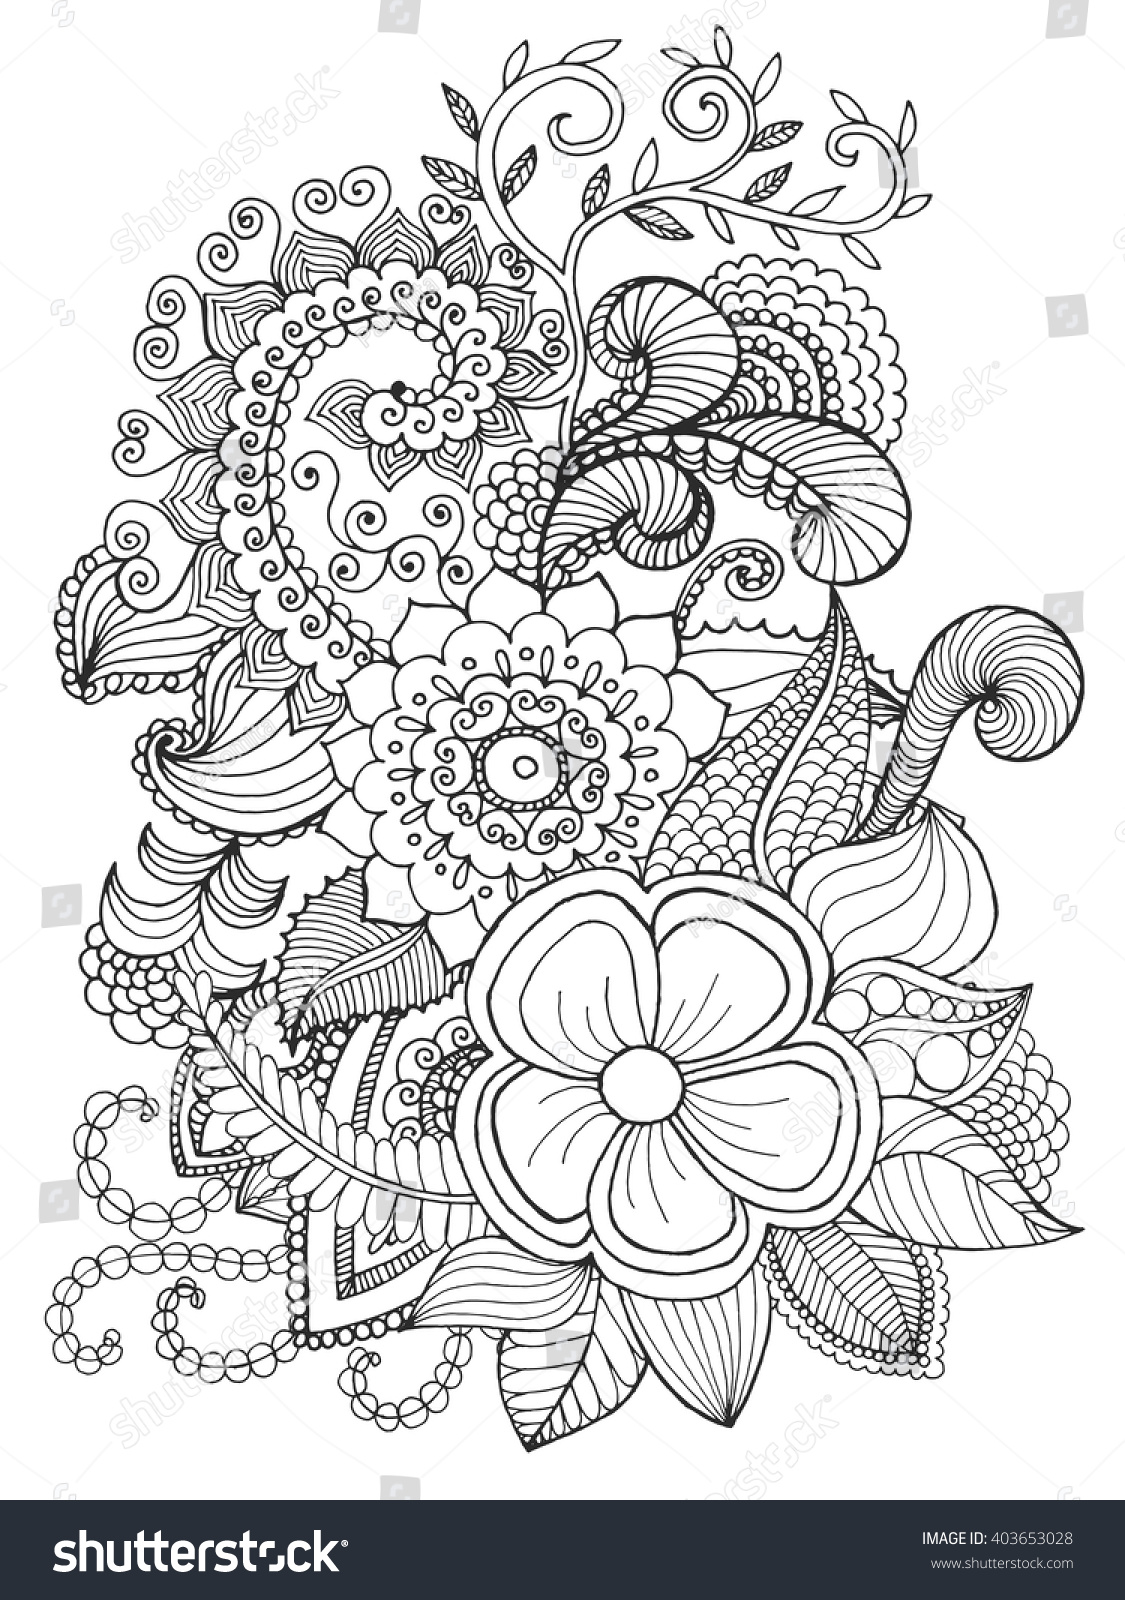 Fantasy Flowers Coloring Page Hand Drawn Stock Vector Royalty ...